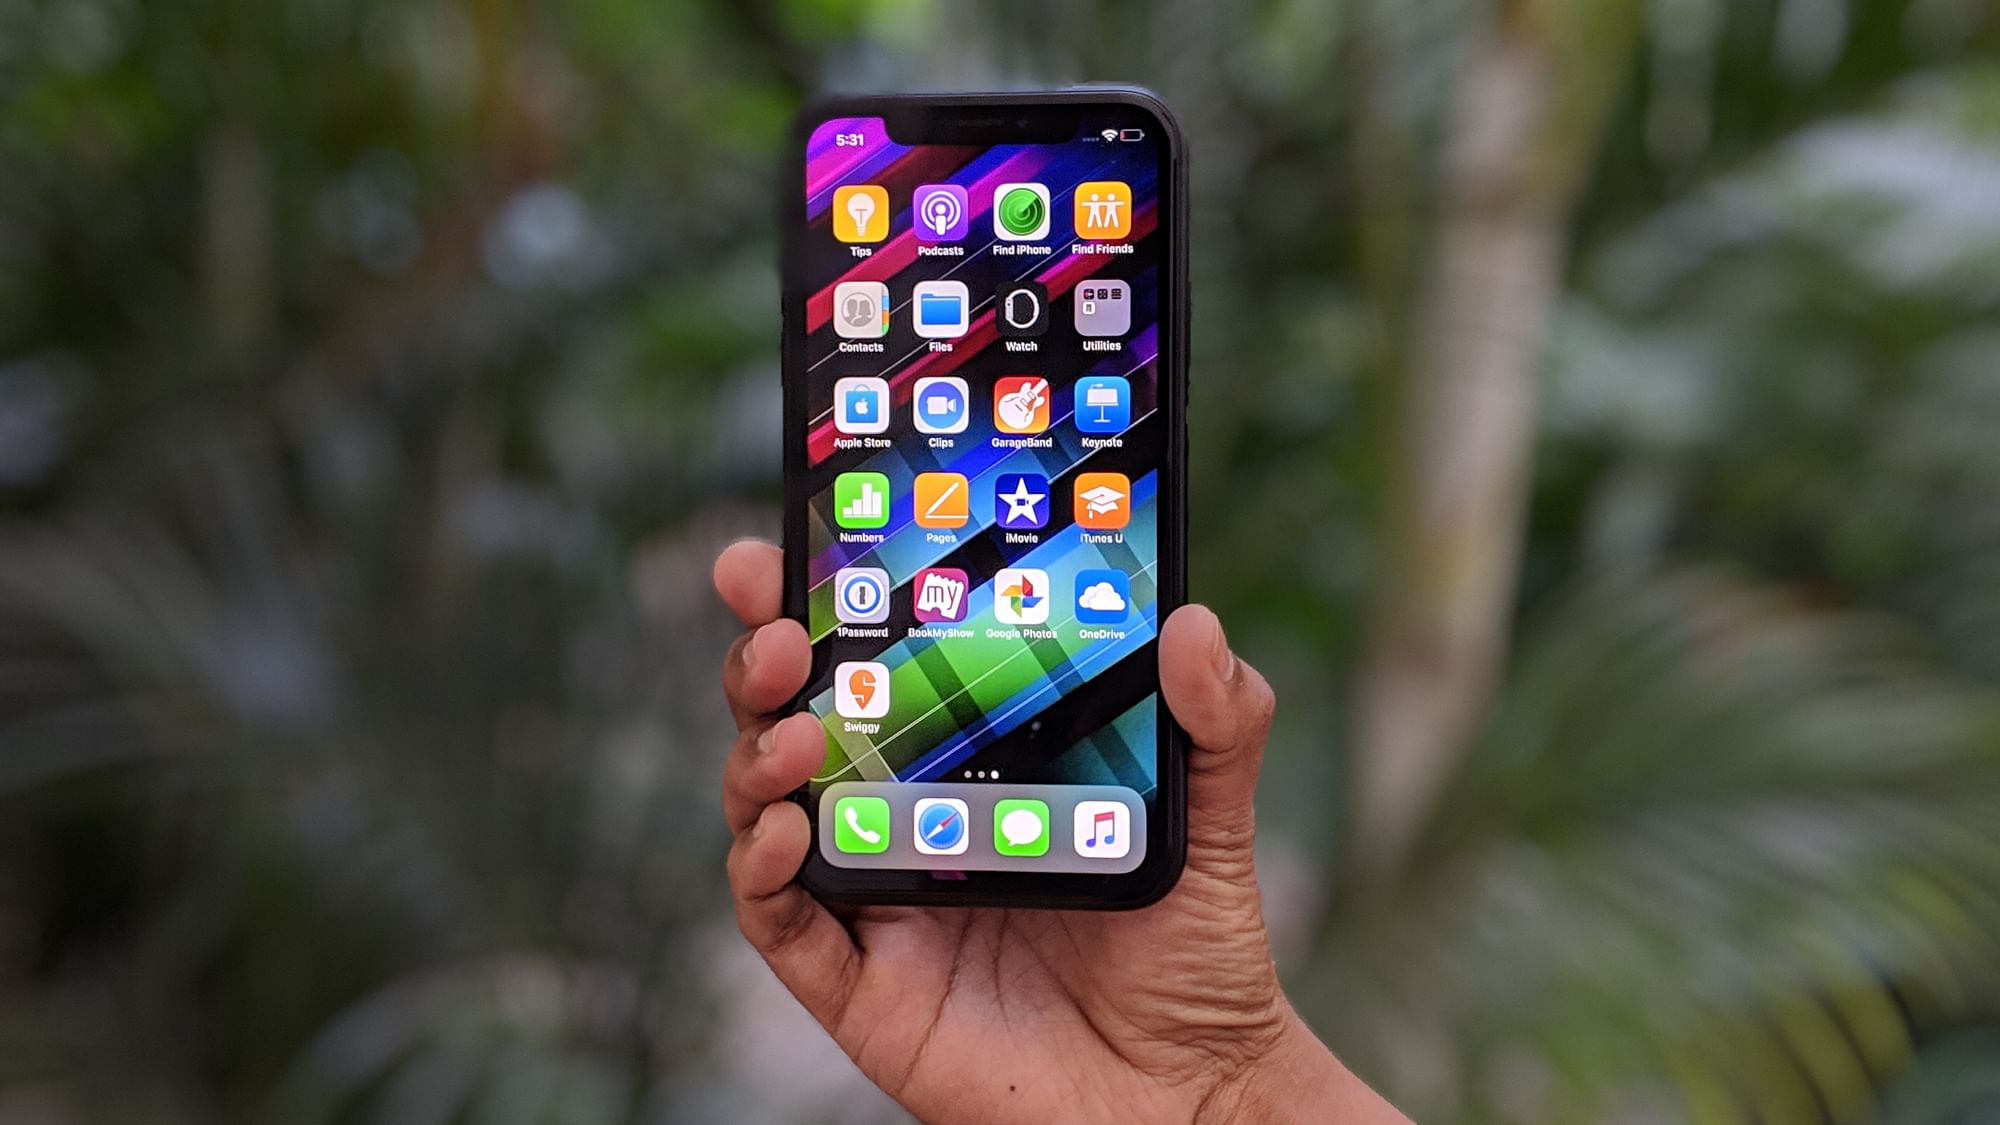 Apple launched the iPhone XR which did well in India after a slew of price cuts.